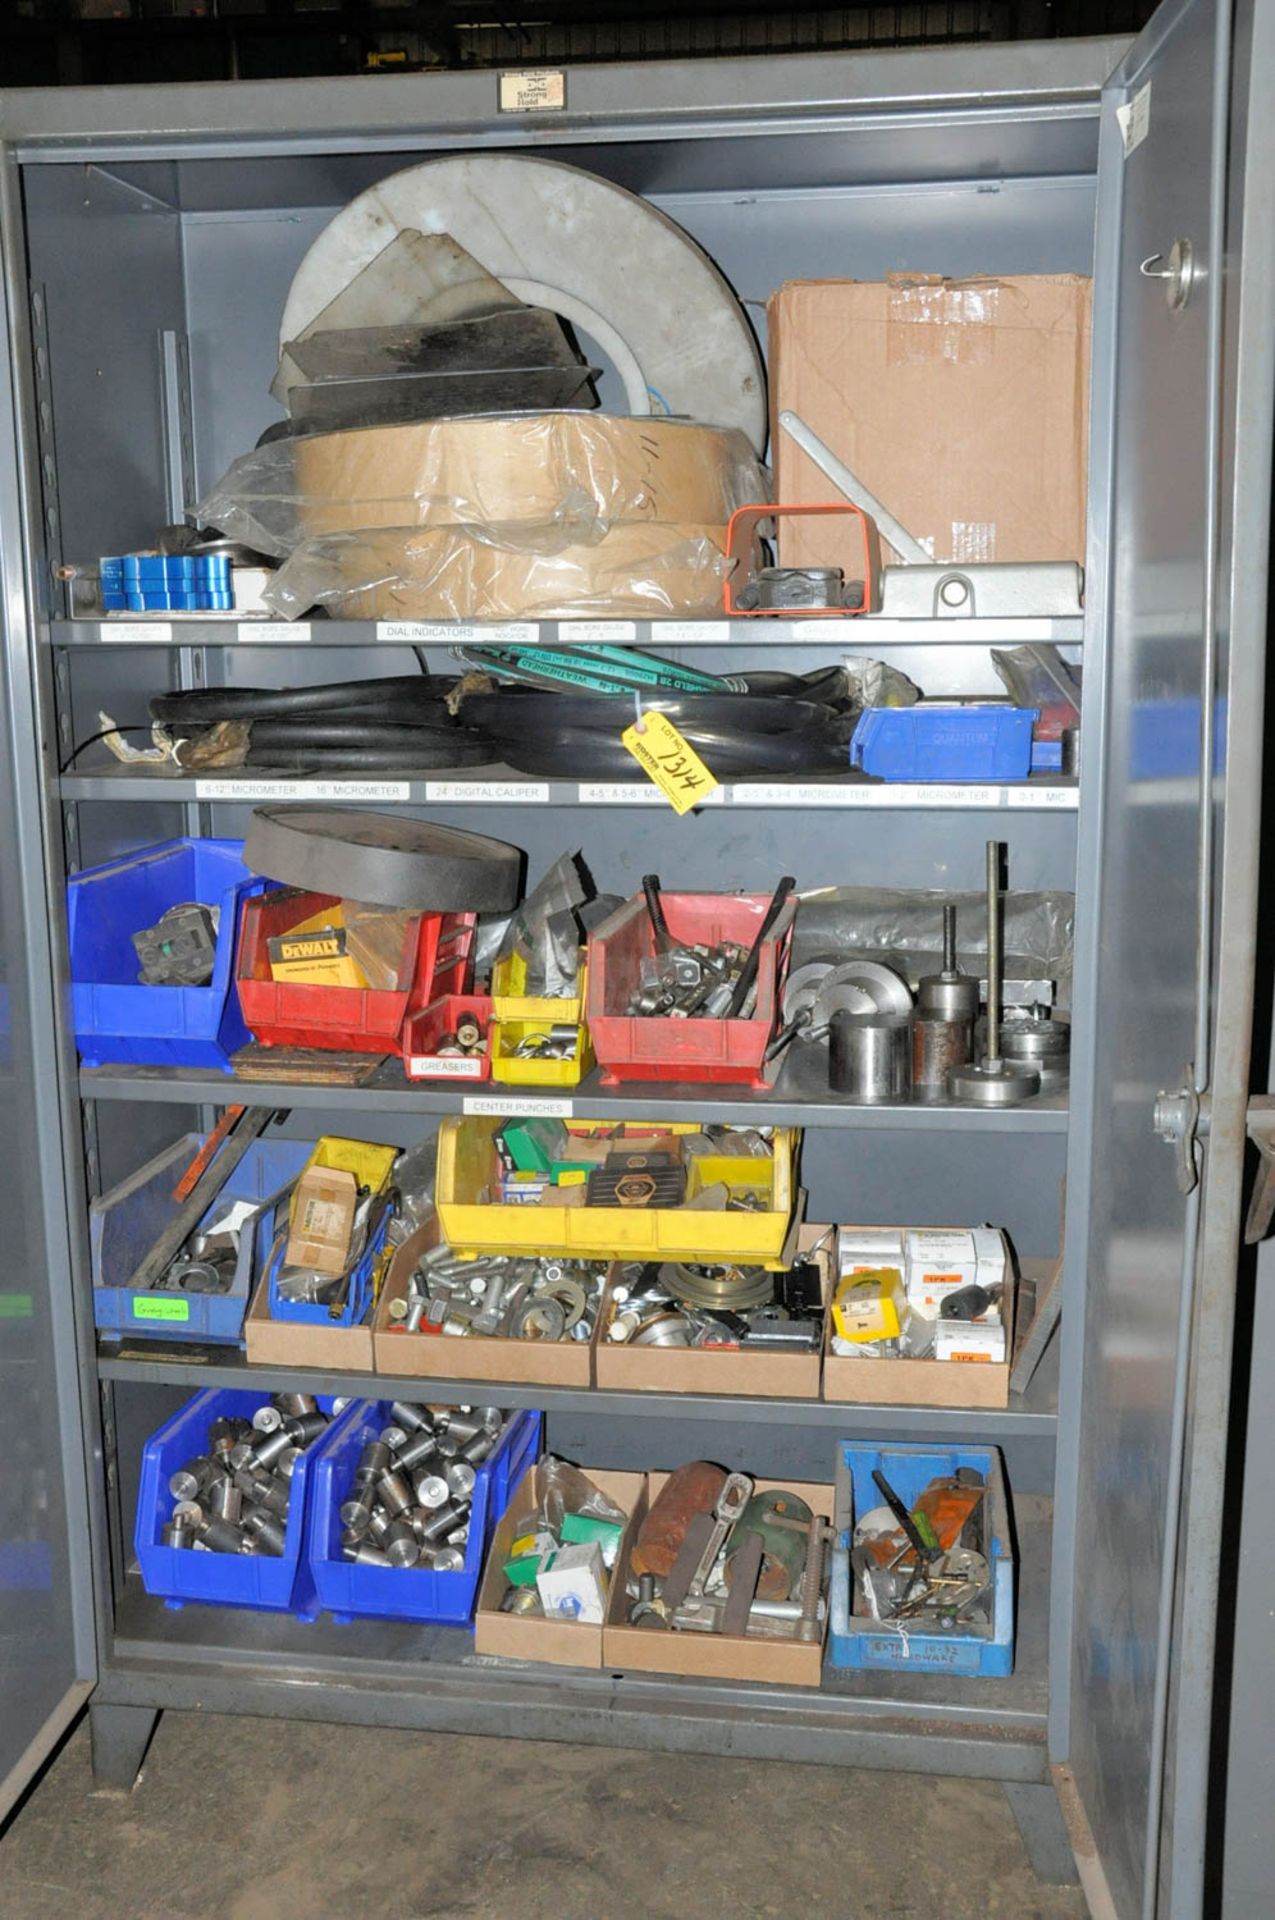 HARDWARE ETC. IN (1) CABINET, (CABINET NOT INCLUDED)